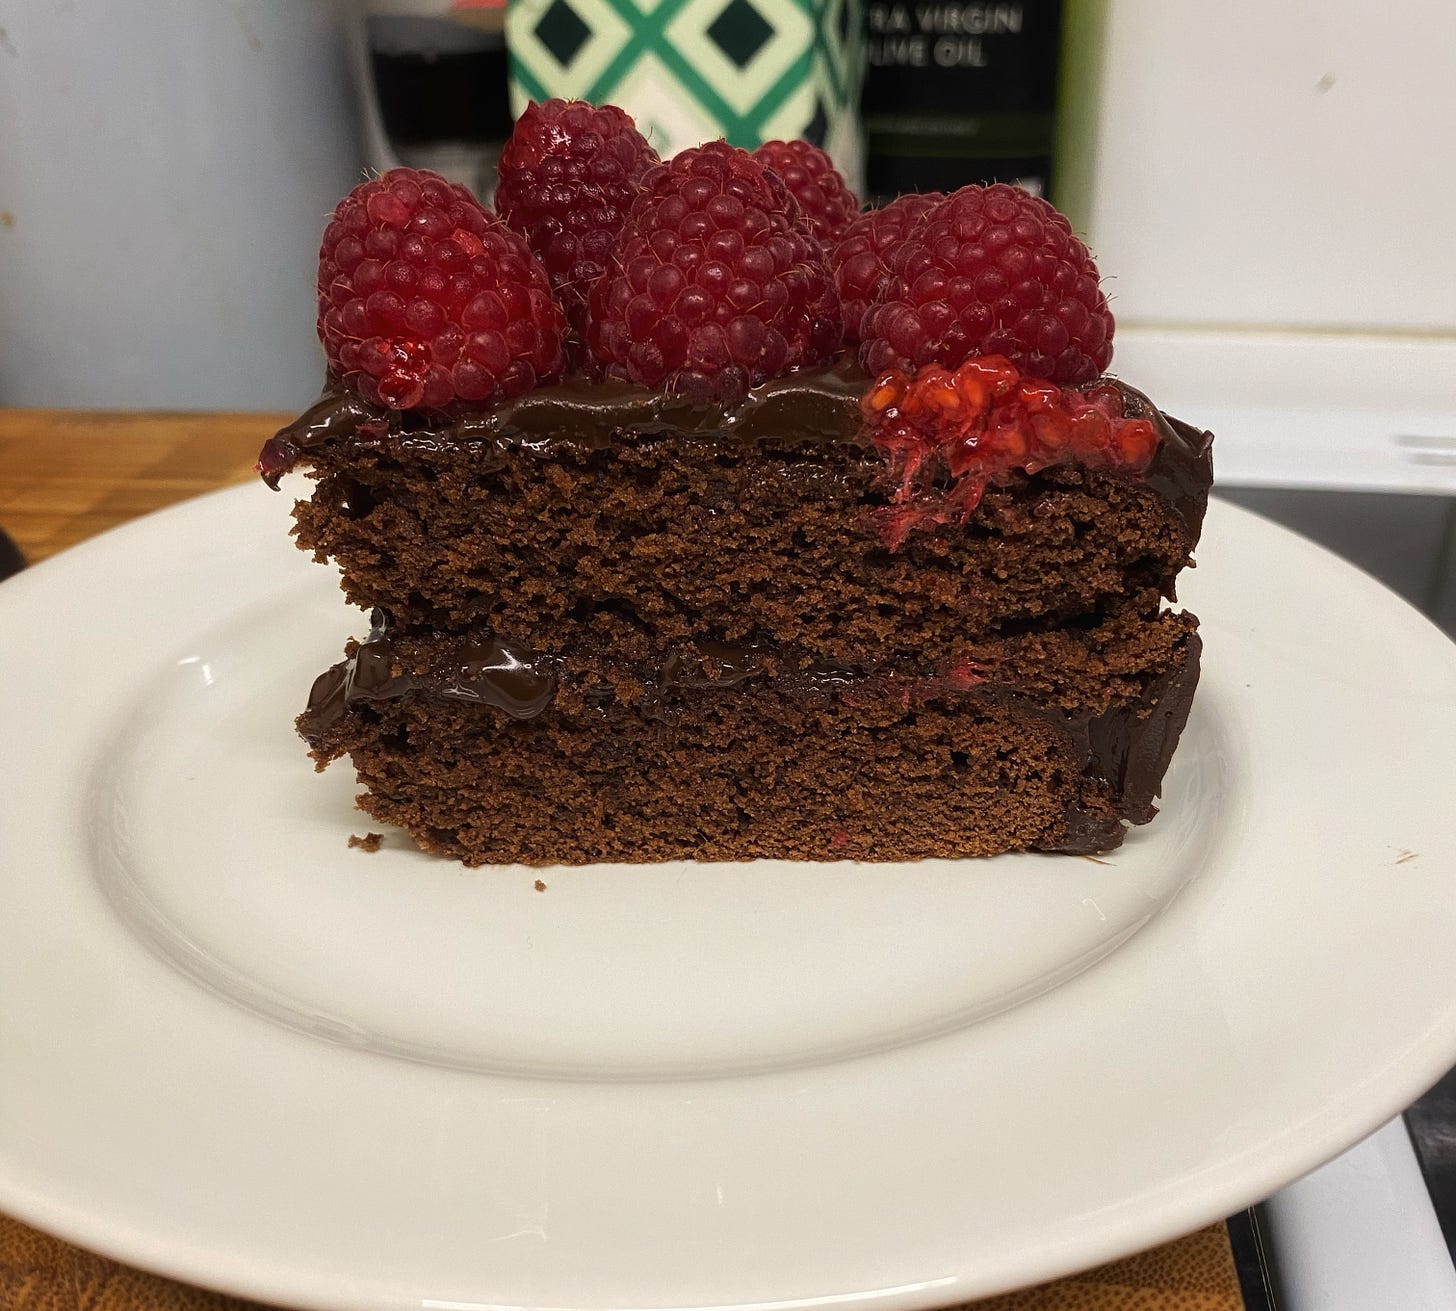 A single slice of chocolate cake, topped with raspberries. One of the raspberries is smushed. 